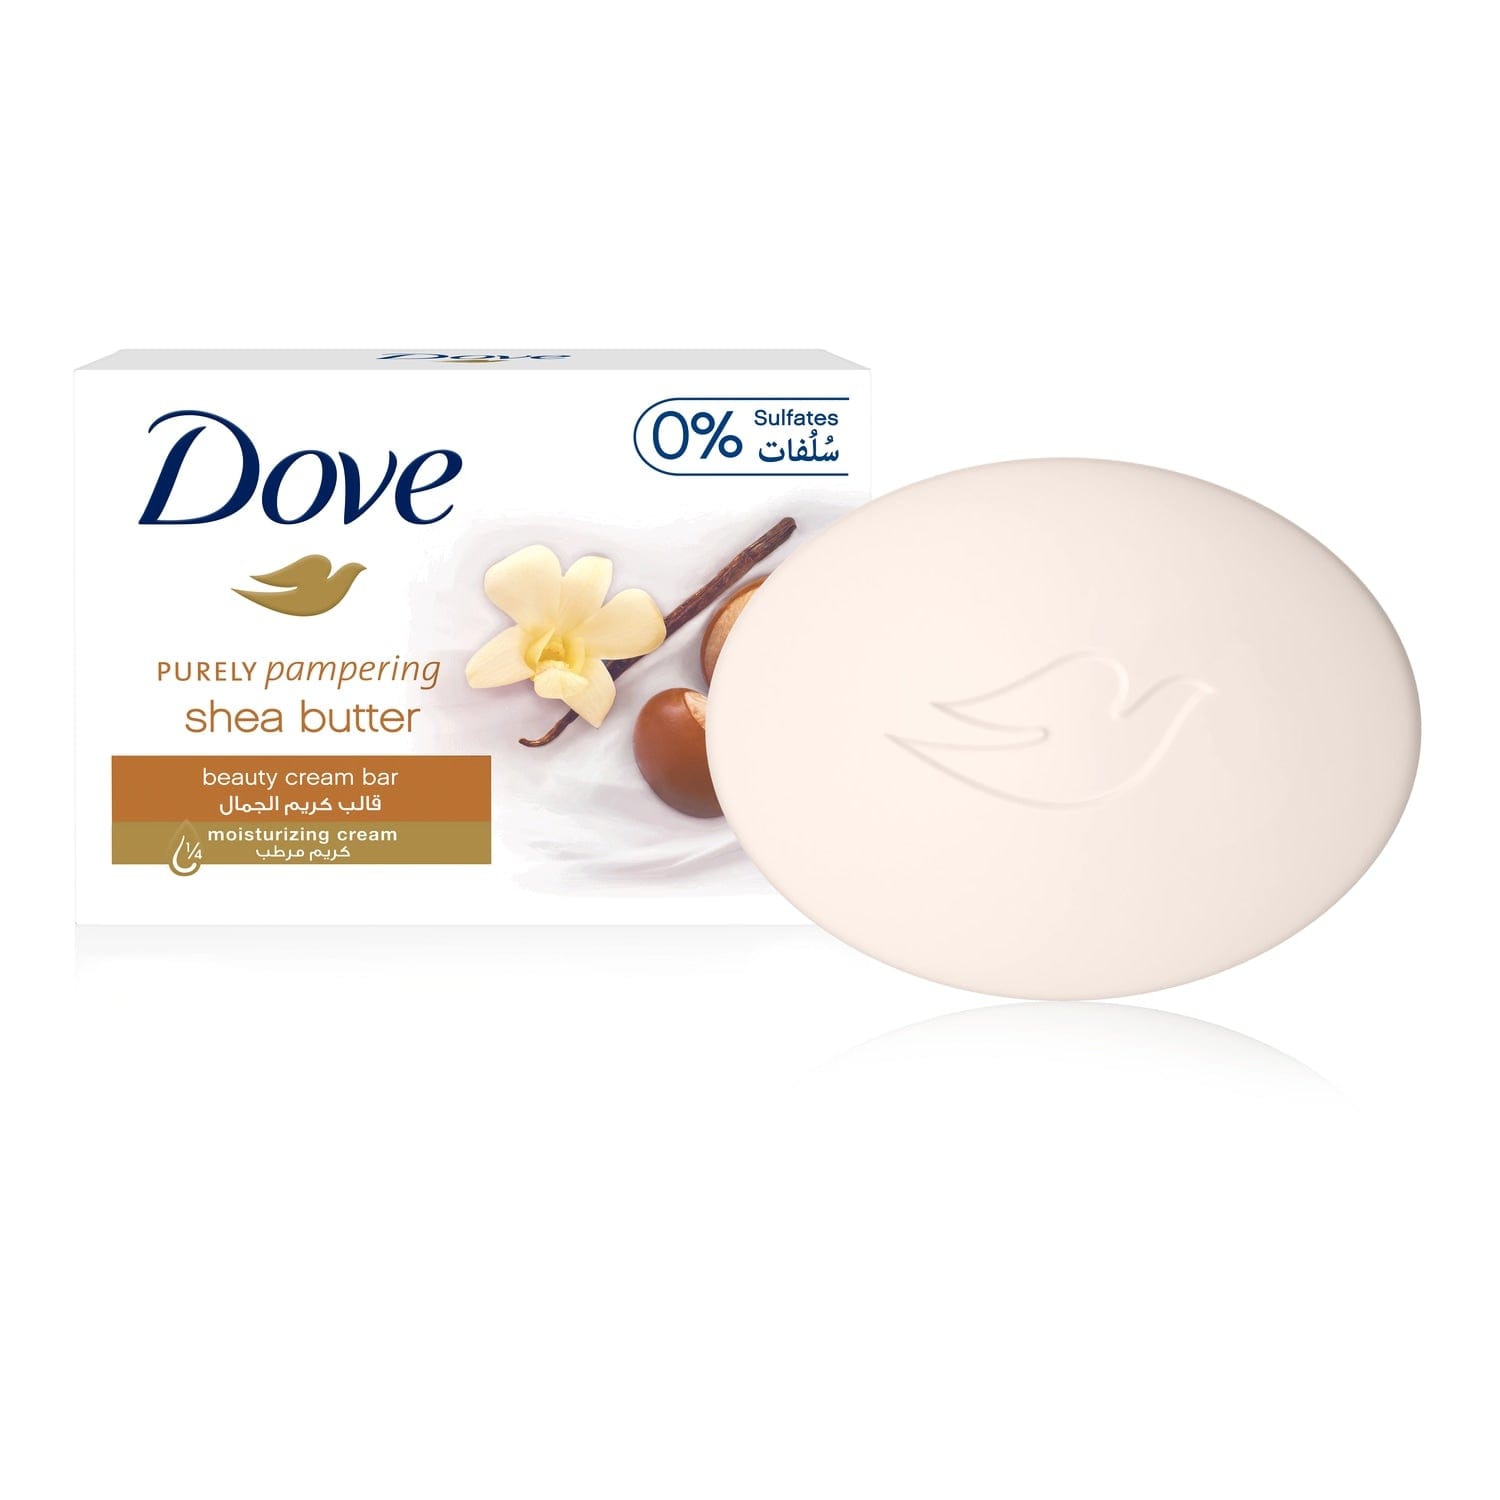 Dove Shea Butter Beauty Bar 16 Units / 3.75 oz / 106 g  Enjoy the gentle cleansers and ¼ cup of moisturizing cream along with the creamy aroma of shea butter and vanilla-390346